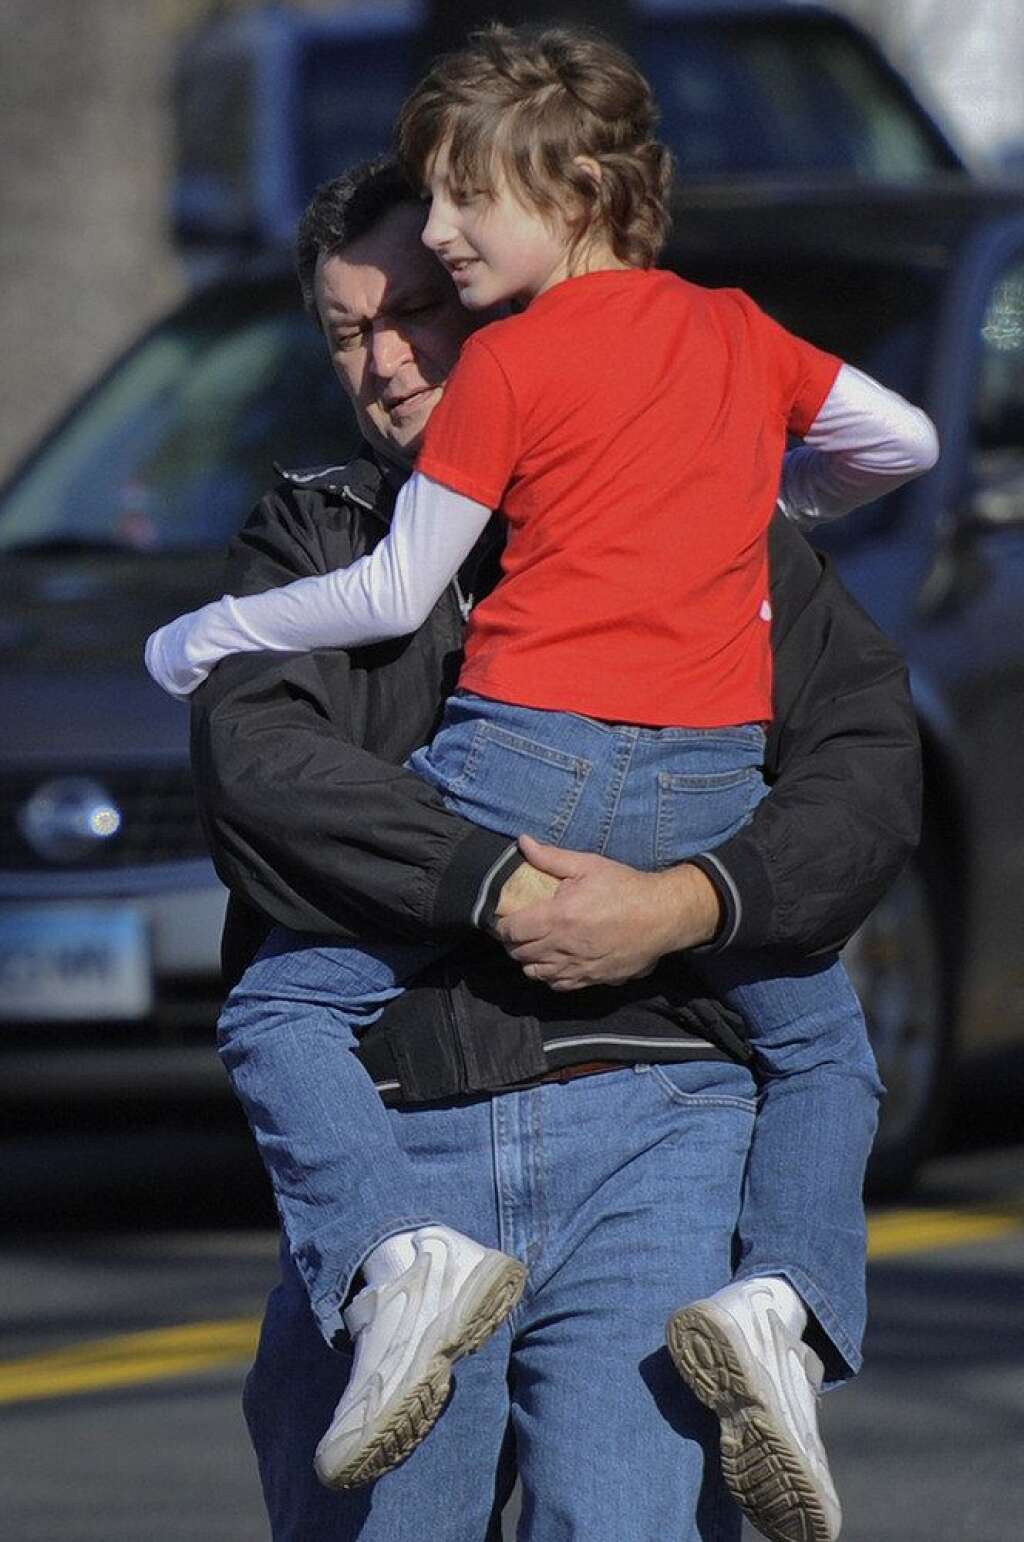 Sandy Hook Elementary School Shooting - A man carries a child away from the area of a shooting at the Sandy Hook Elementary School in Newtown, Conn., about 60 miles (96 kilometers) northeast of New York City, Friday, Dec. 14, 2012. A man opened fire Friday inside two classrooms at the school, killing 26 people, including 20 children. The killer, armed with two handguns, committed suicide at the school and another person was found dead at a second scene, bringing the toll to 28, authorities said. A law enforcement official identified the gunman as 20-year-old Adam Lanza. (AP Photo/Jessica Hill)